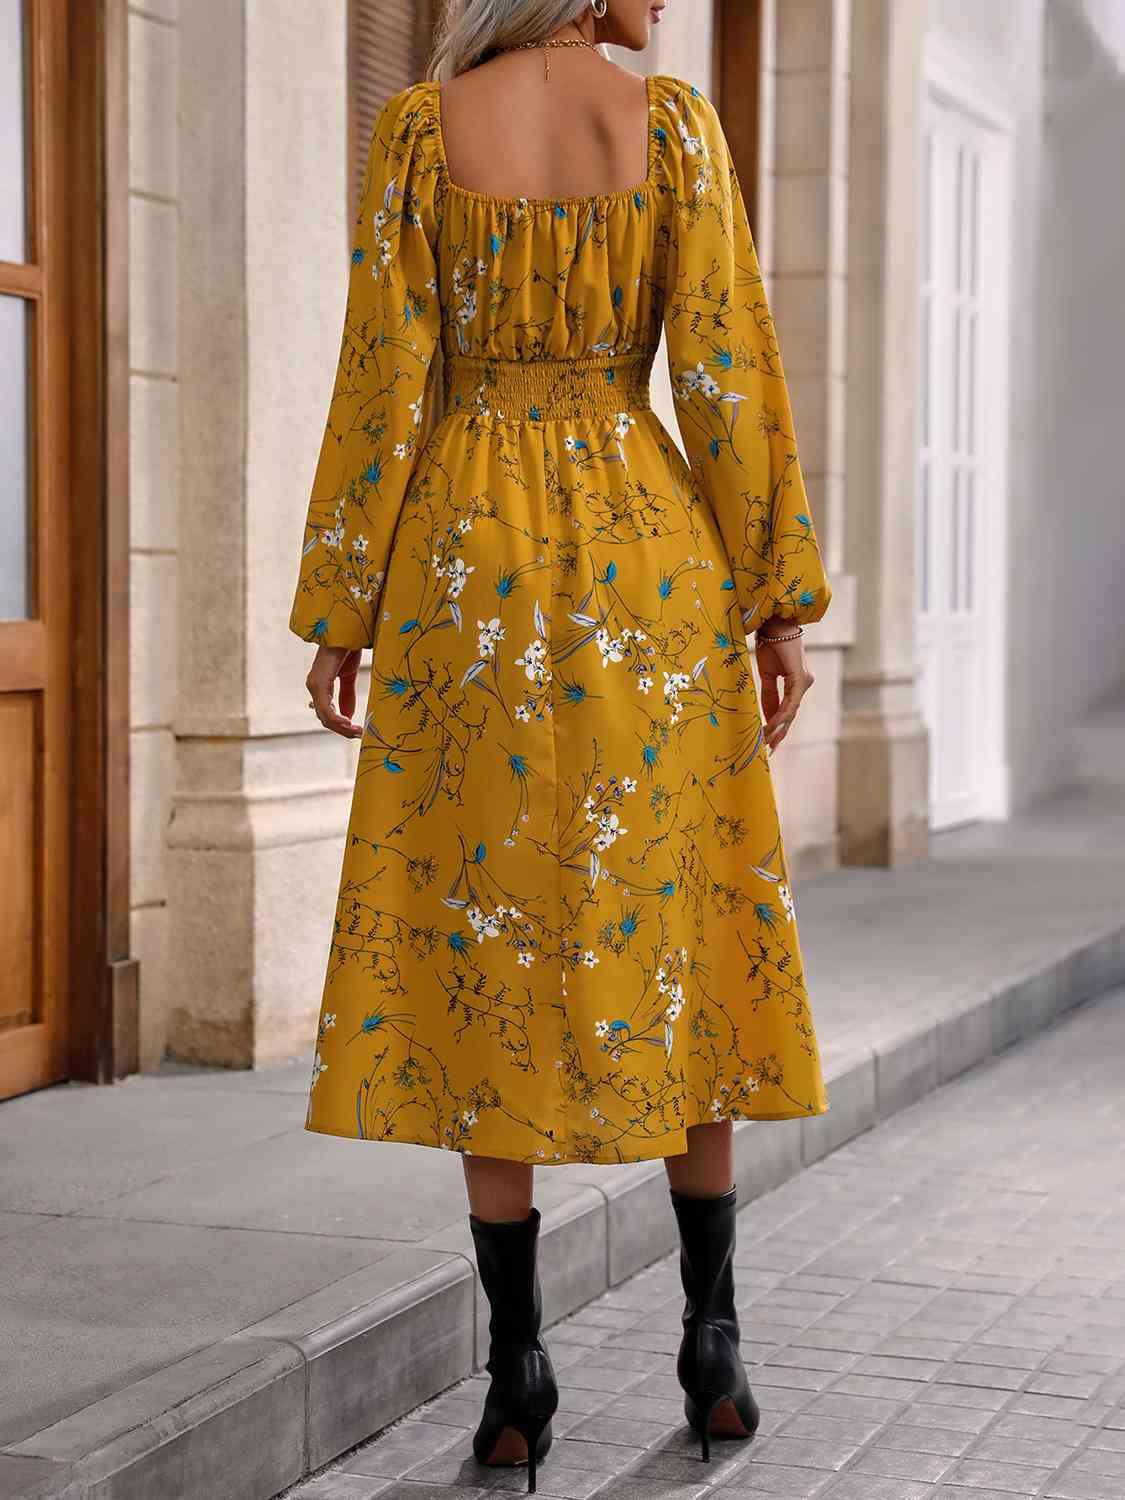 a woman in a yellow dress walking down the street